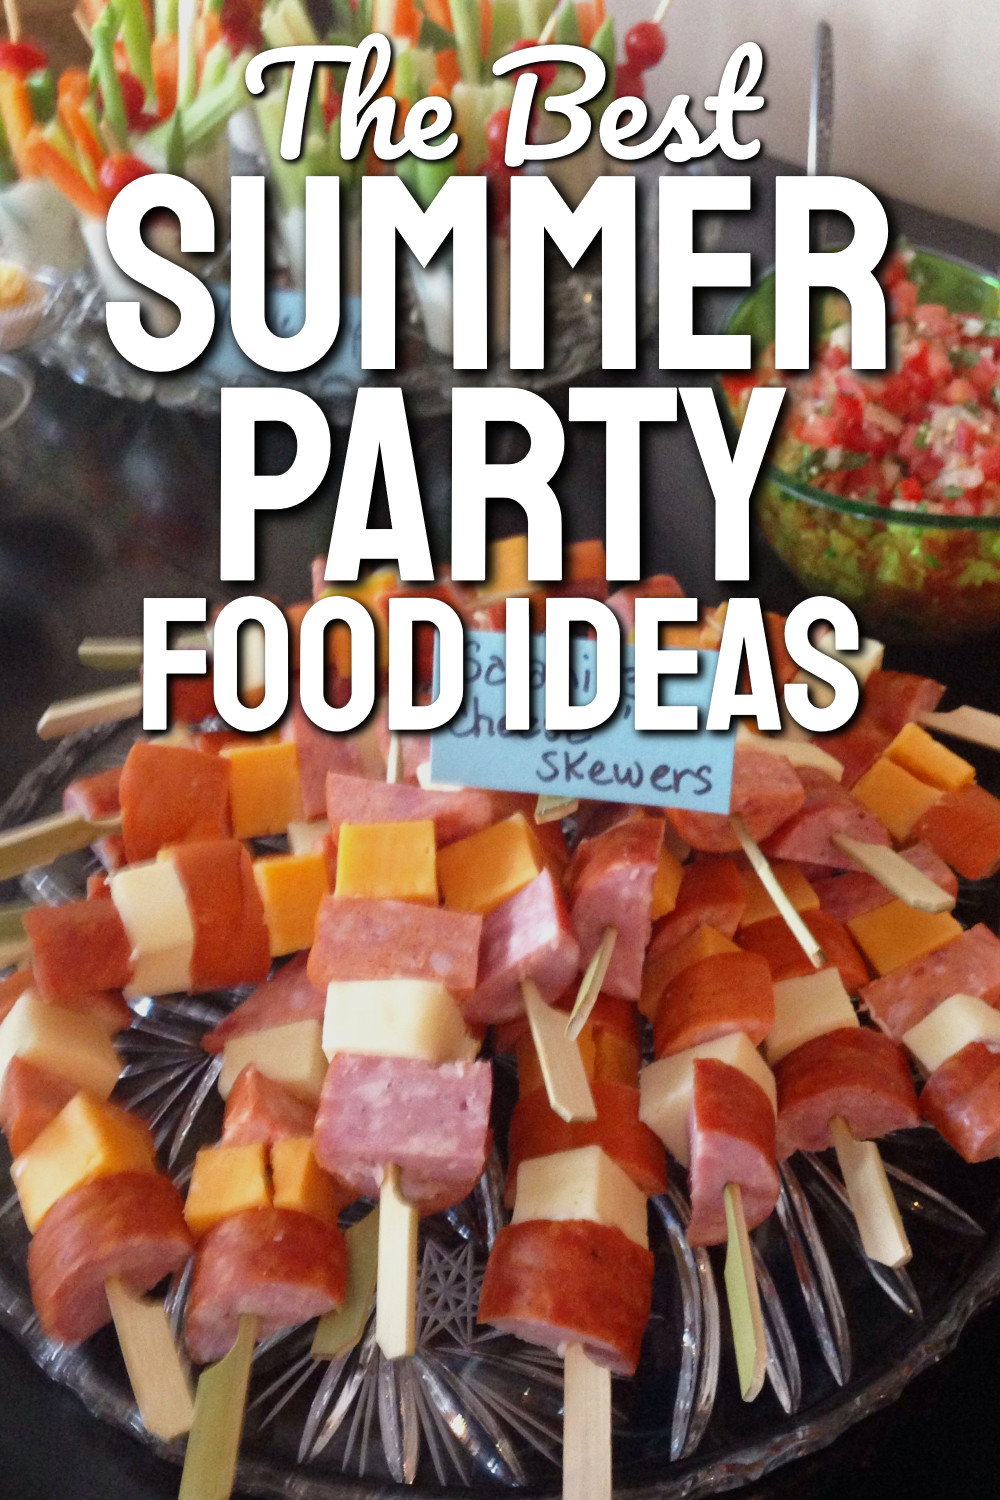 The Best Summer Party Food Ideas